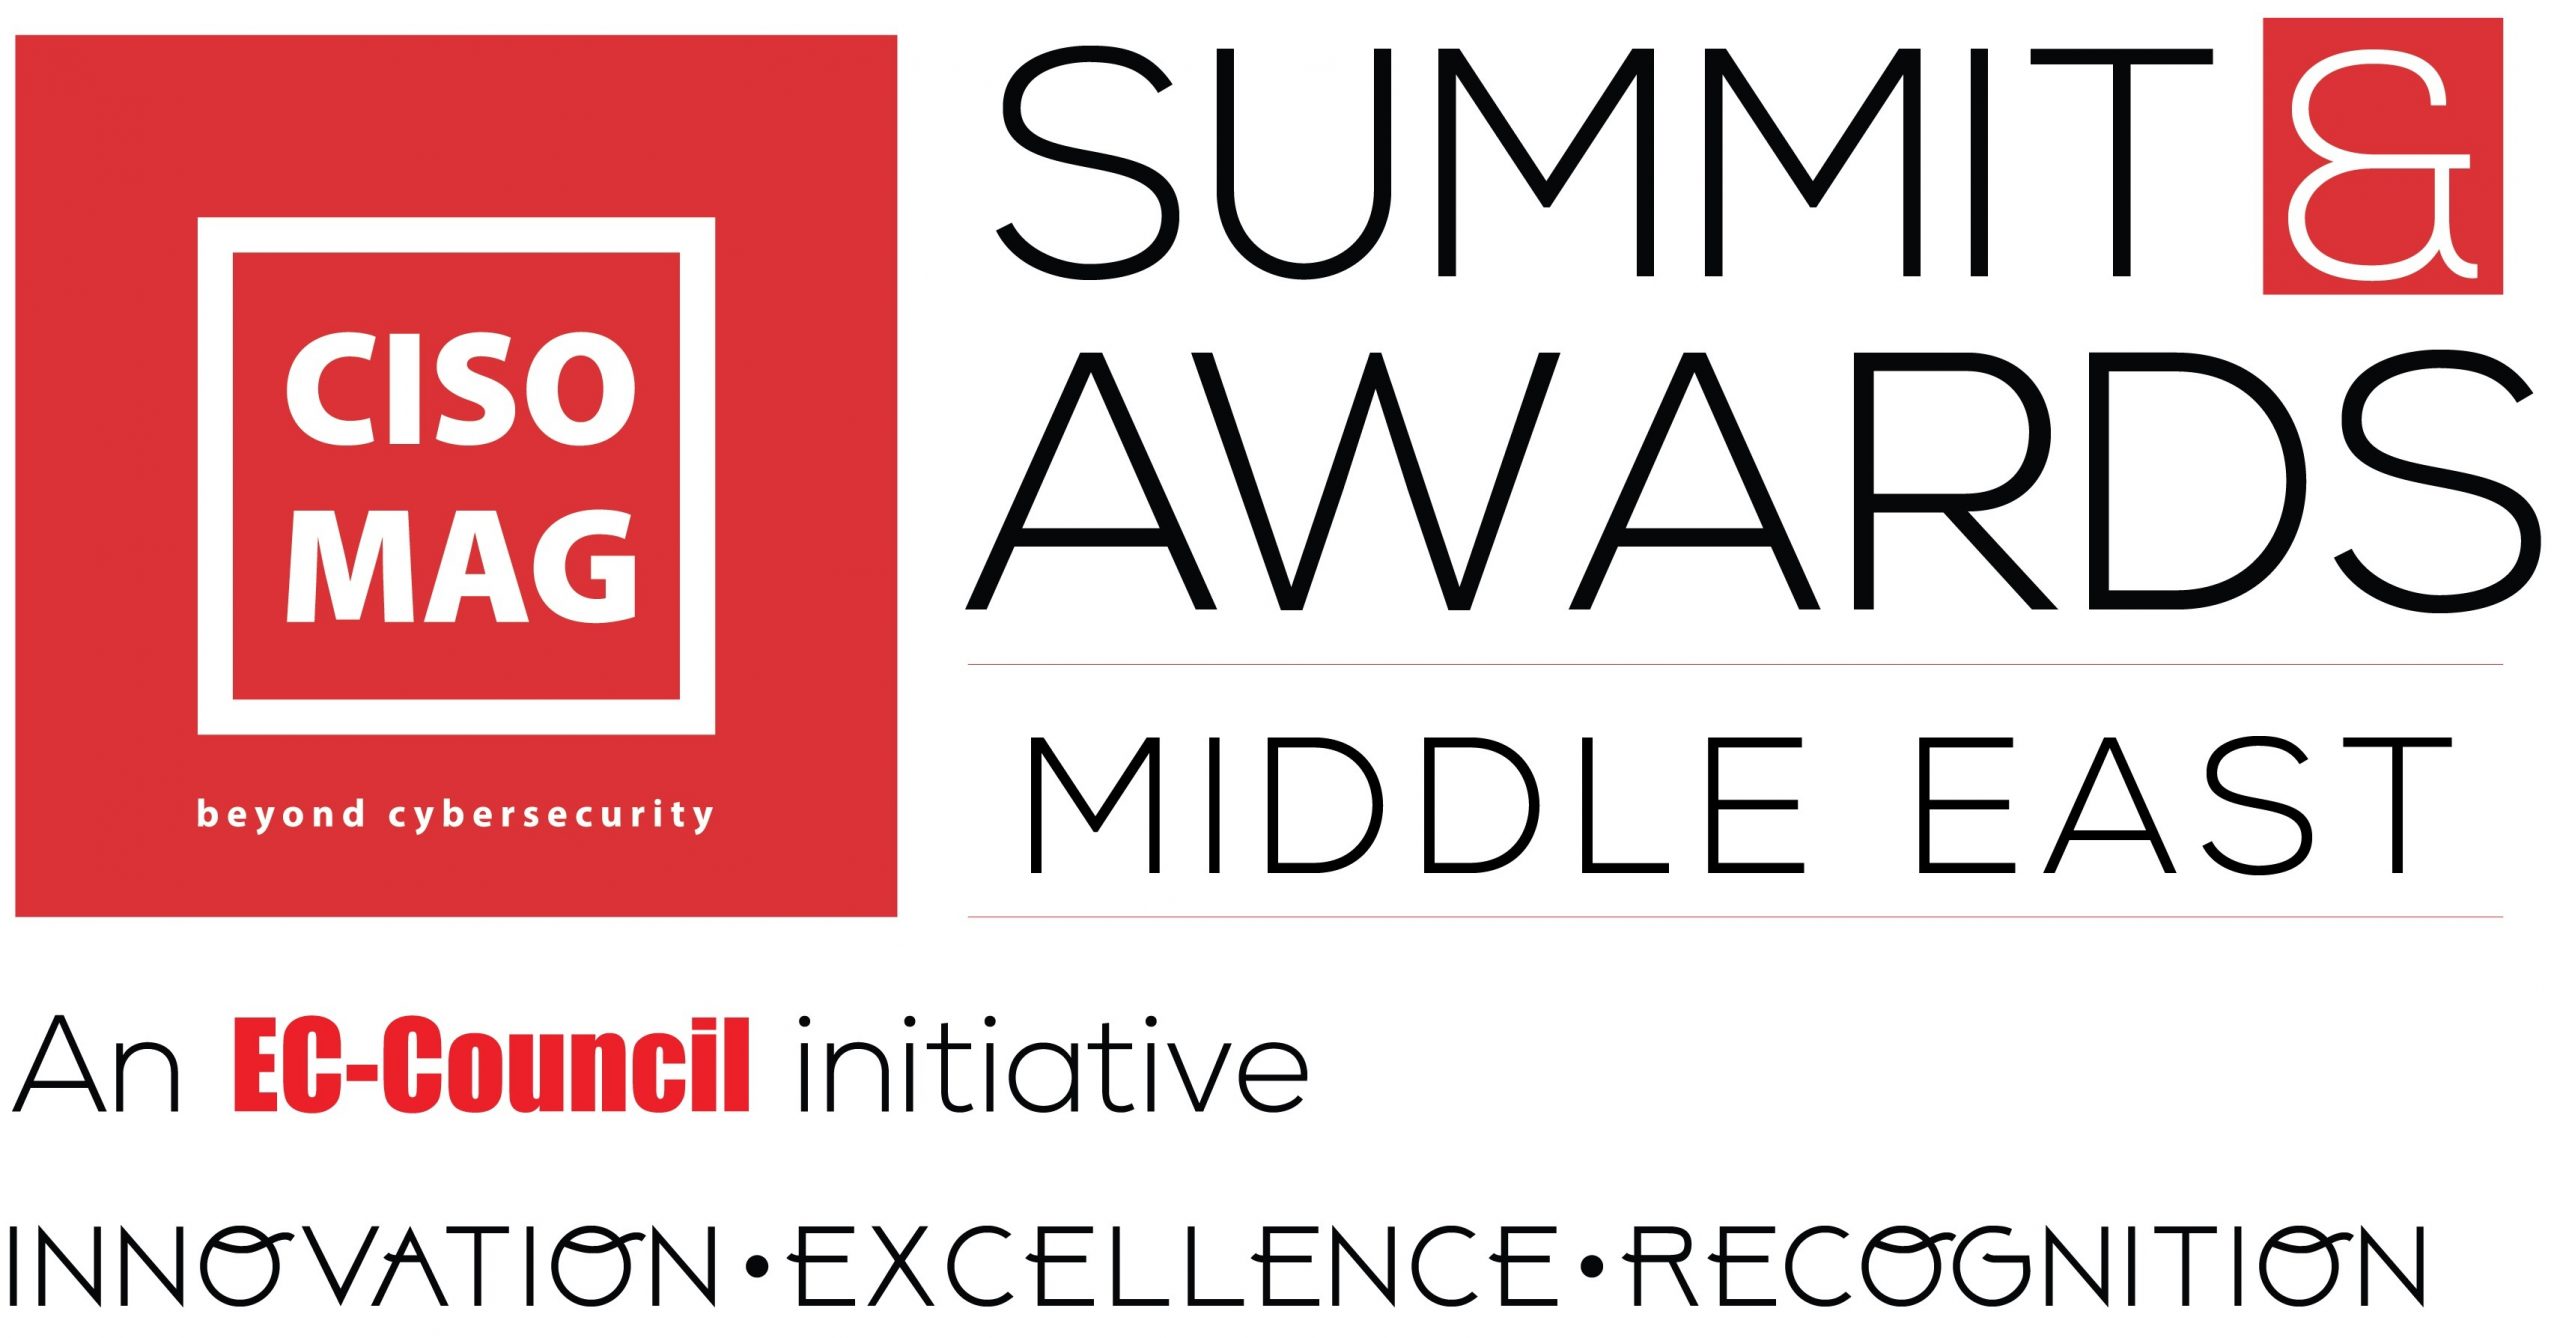 Ciso Mag Summit & Awards Middle East - Coming Soon in UAE